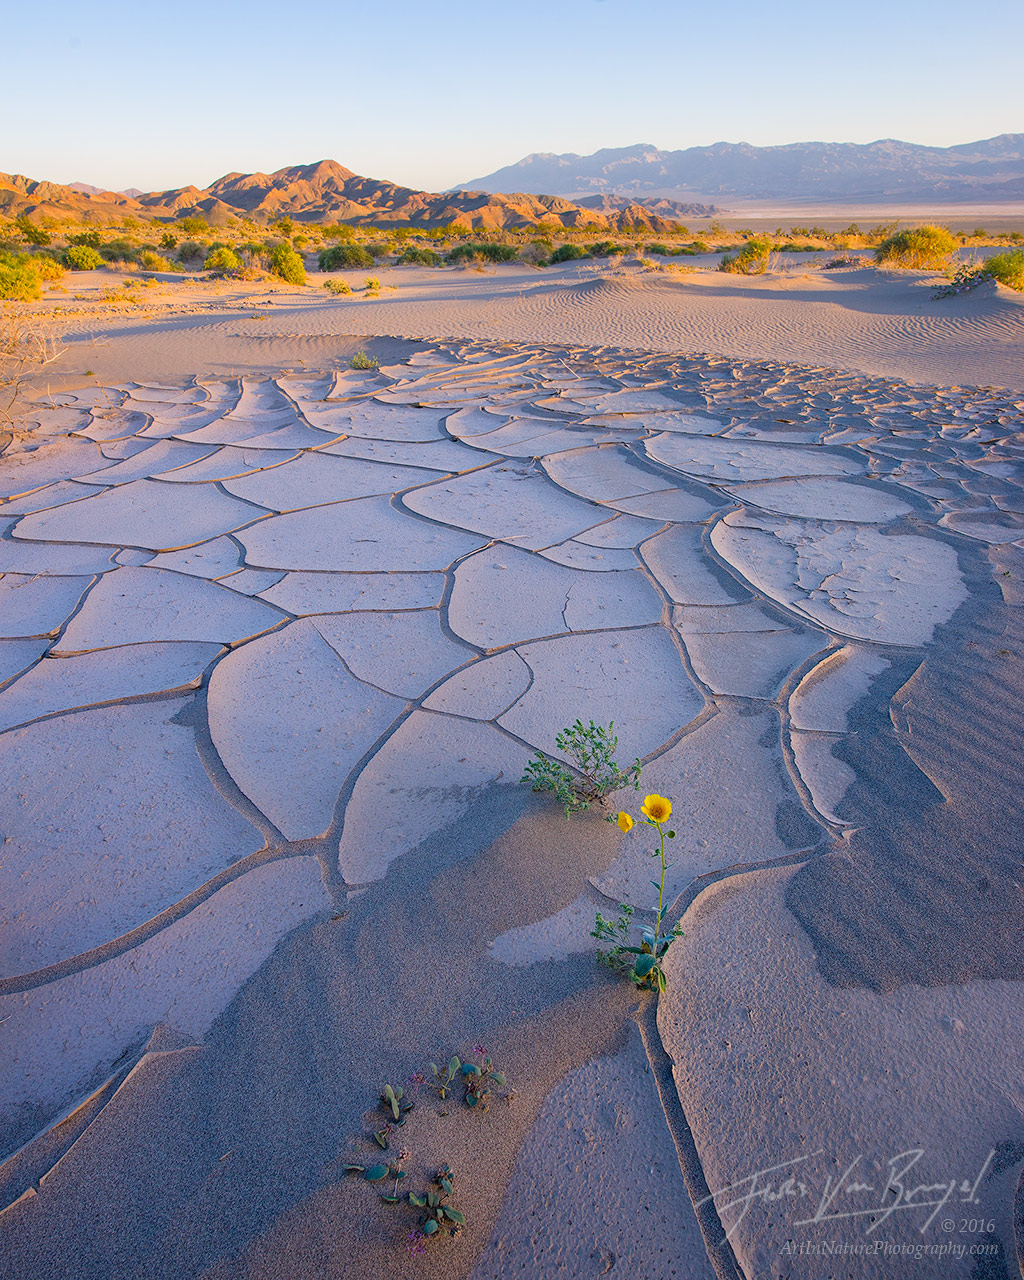 A lonely Desert Gold flower finds a foothold in the dry desert of California's Death Valley National Park.